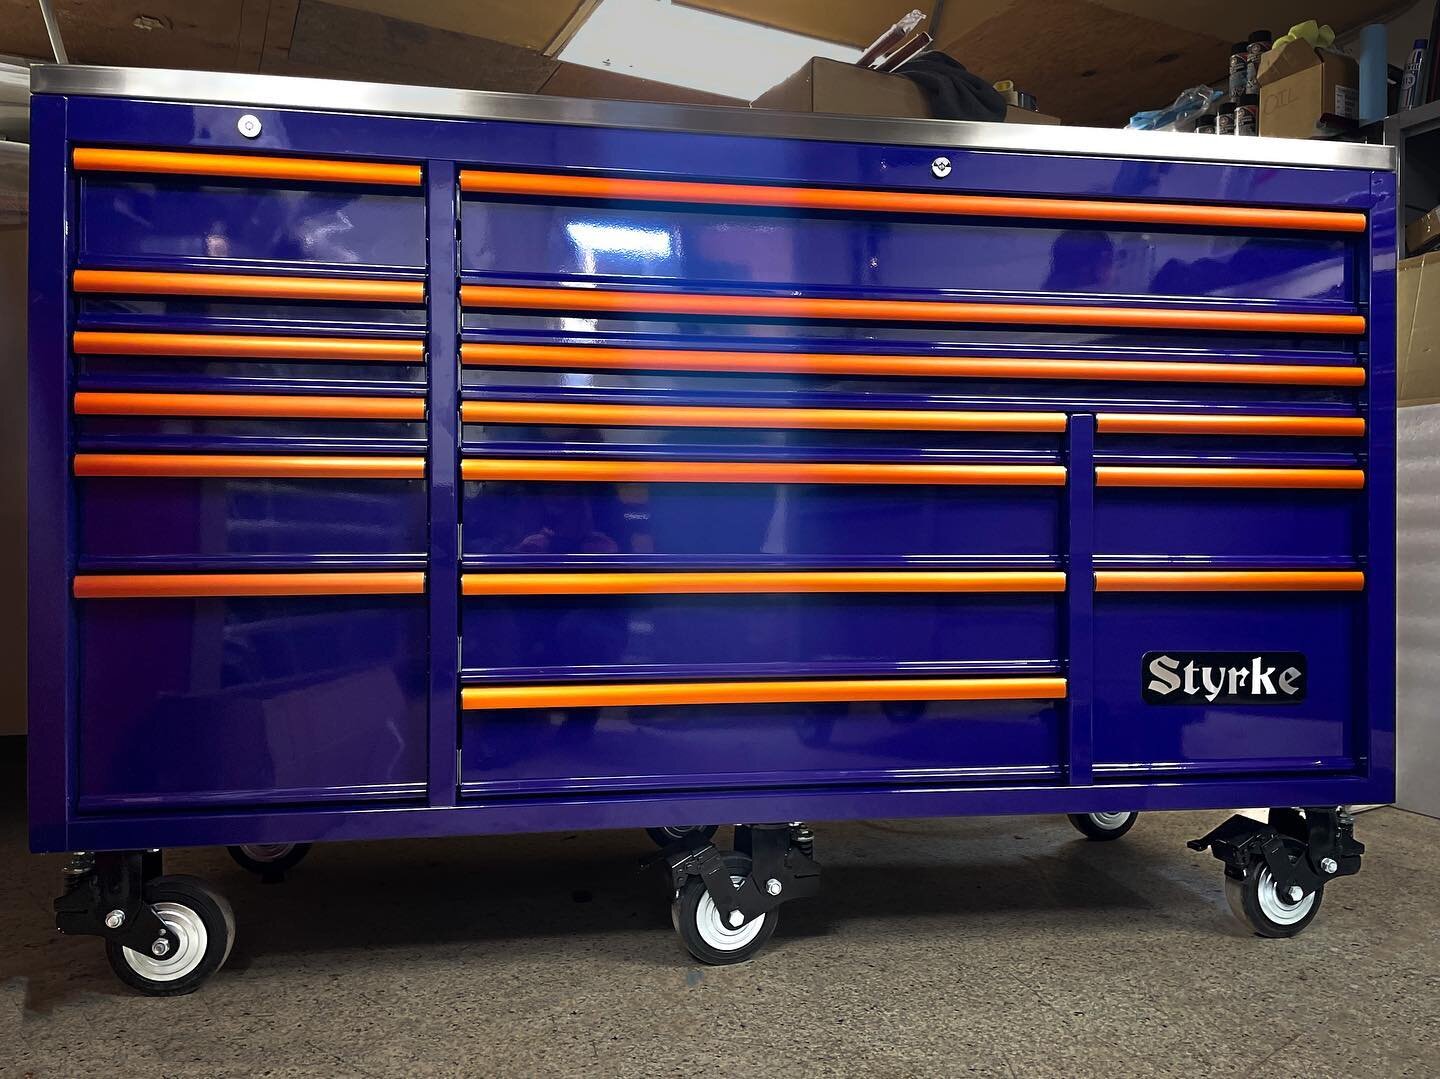 🟣🟠STB72-442🟠🟣

Another unique colour combo! 

Purple is in stock and available for purchase now. All trims colours are available excluding purple. 
&bull;
&bull;
&bull;
#purple #toolchest #toolstorage #toolcart #toolbox #stainlesssteel #anodizeda